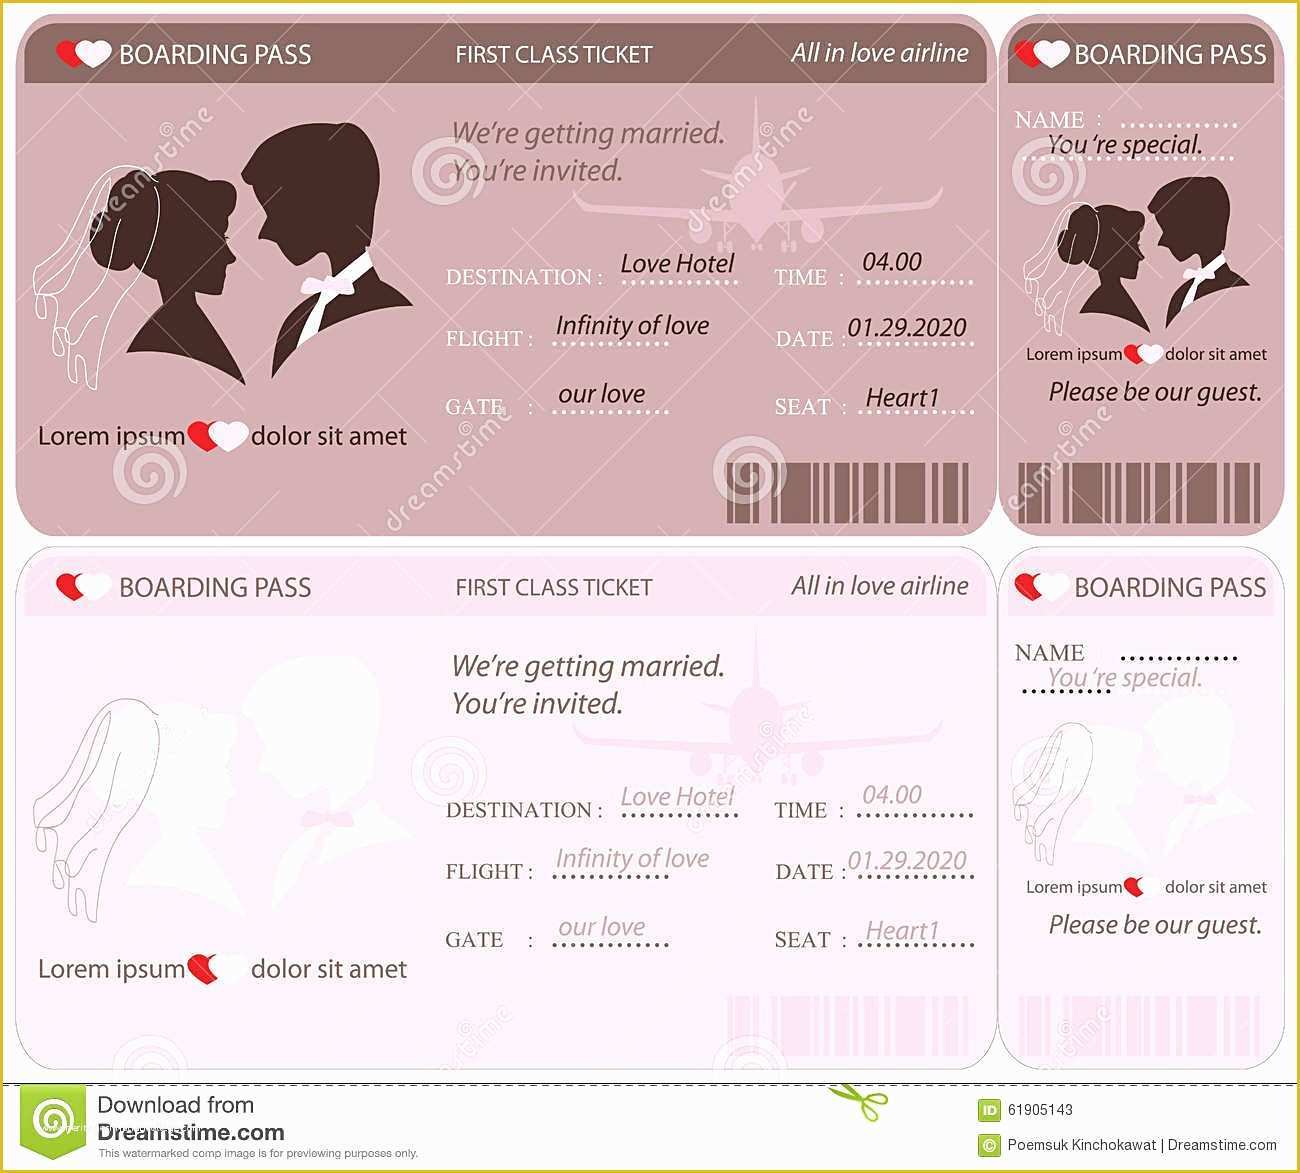 Boarding Pass Invitation Template Free Of Airline Ticket Invitation Example Mughals